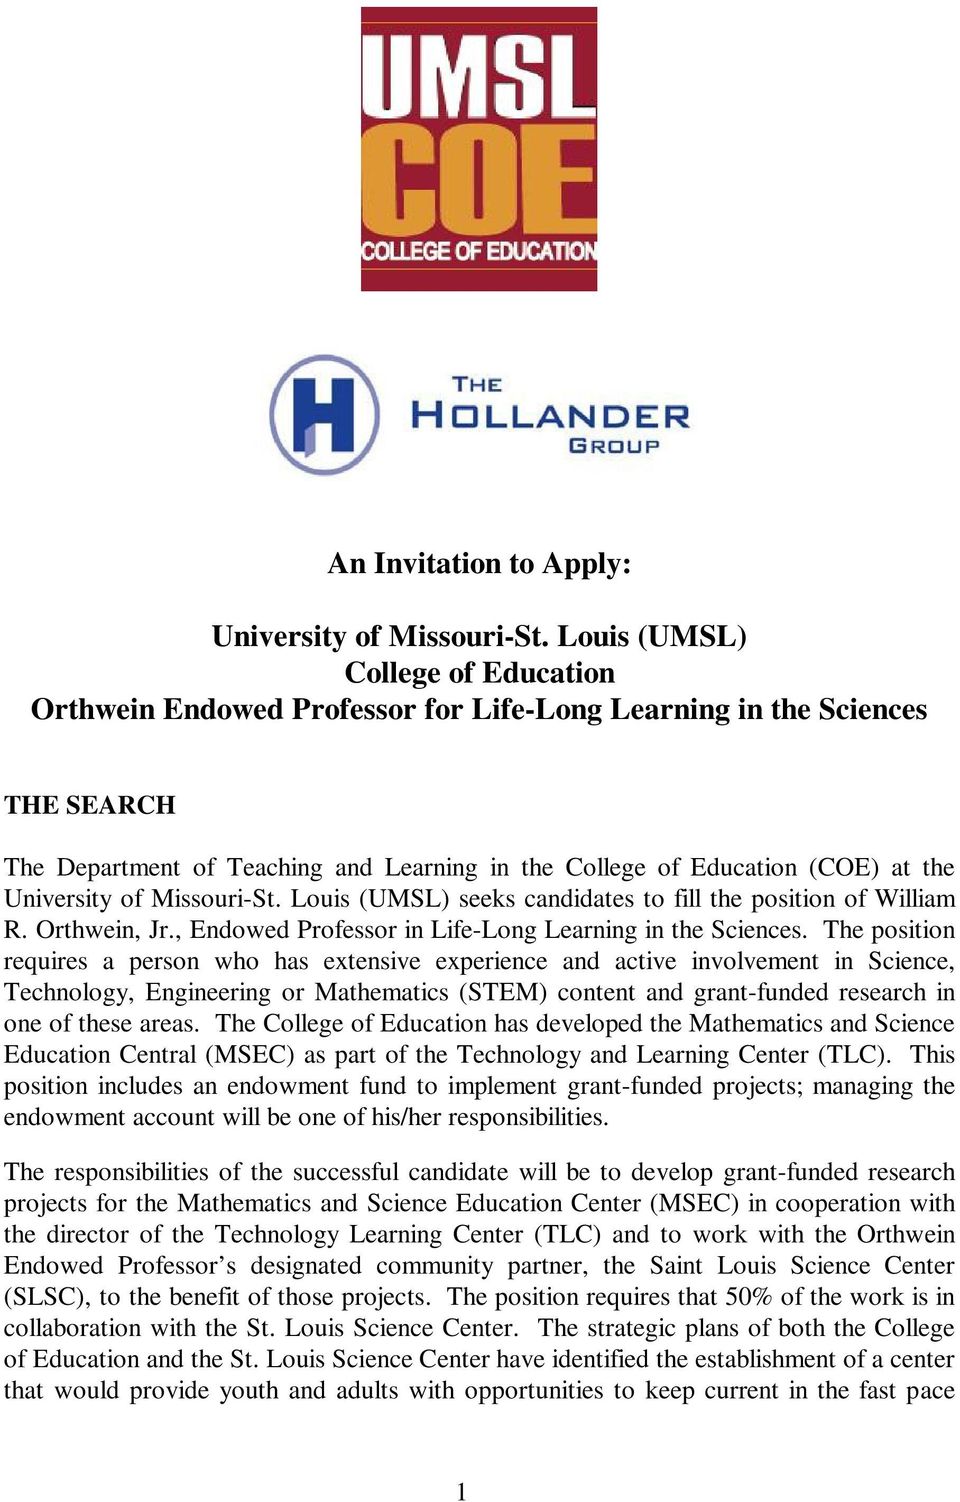 University of Missouri-St. Louis (UMSL) seeks candidates to fill the position of William R. Orthwein, Jr., Endowed Professor in Life-Long Learning in the Sciences.